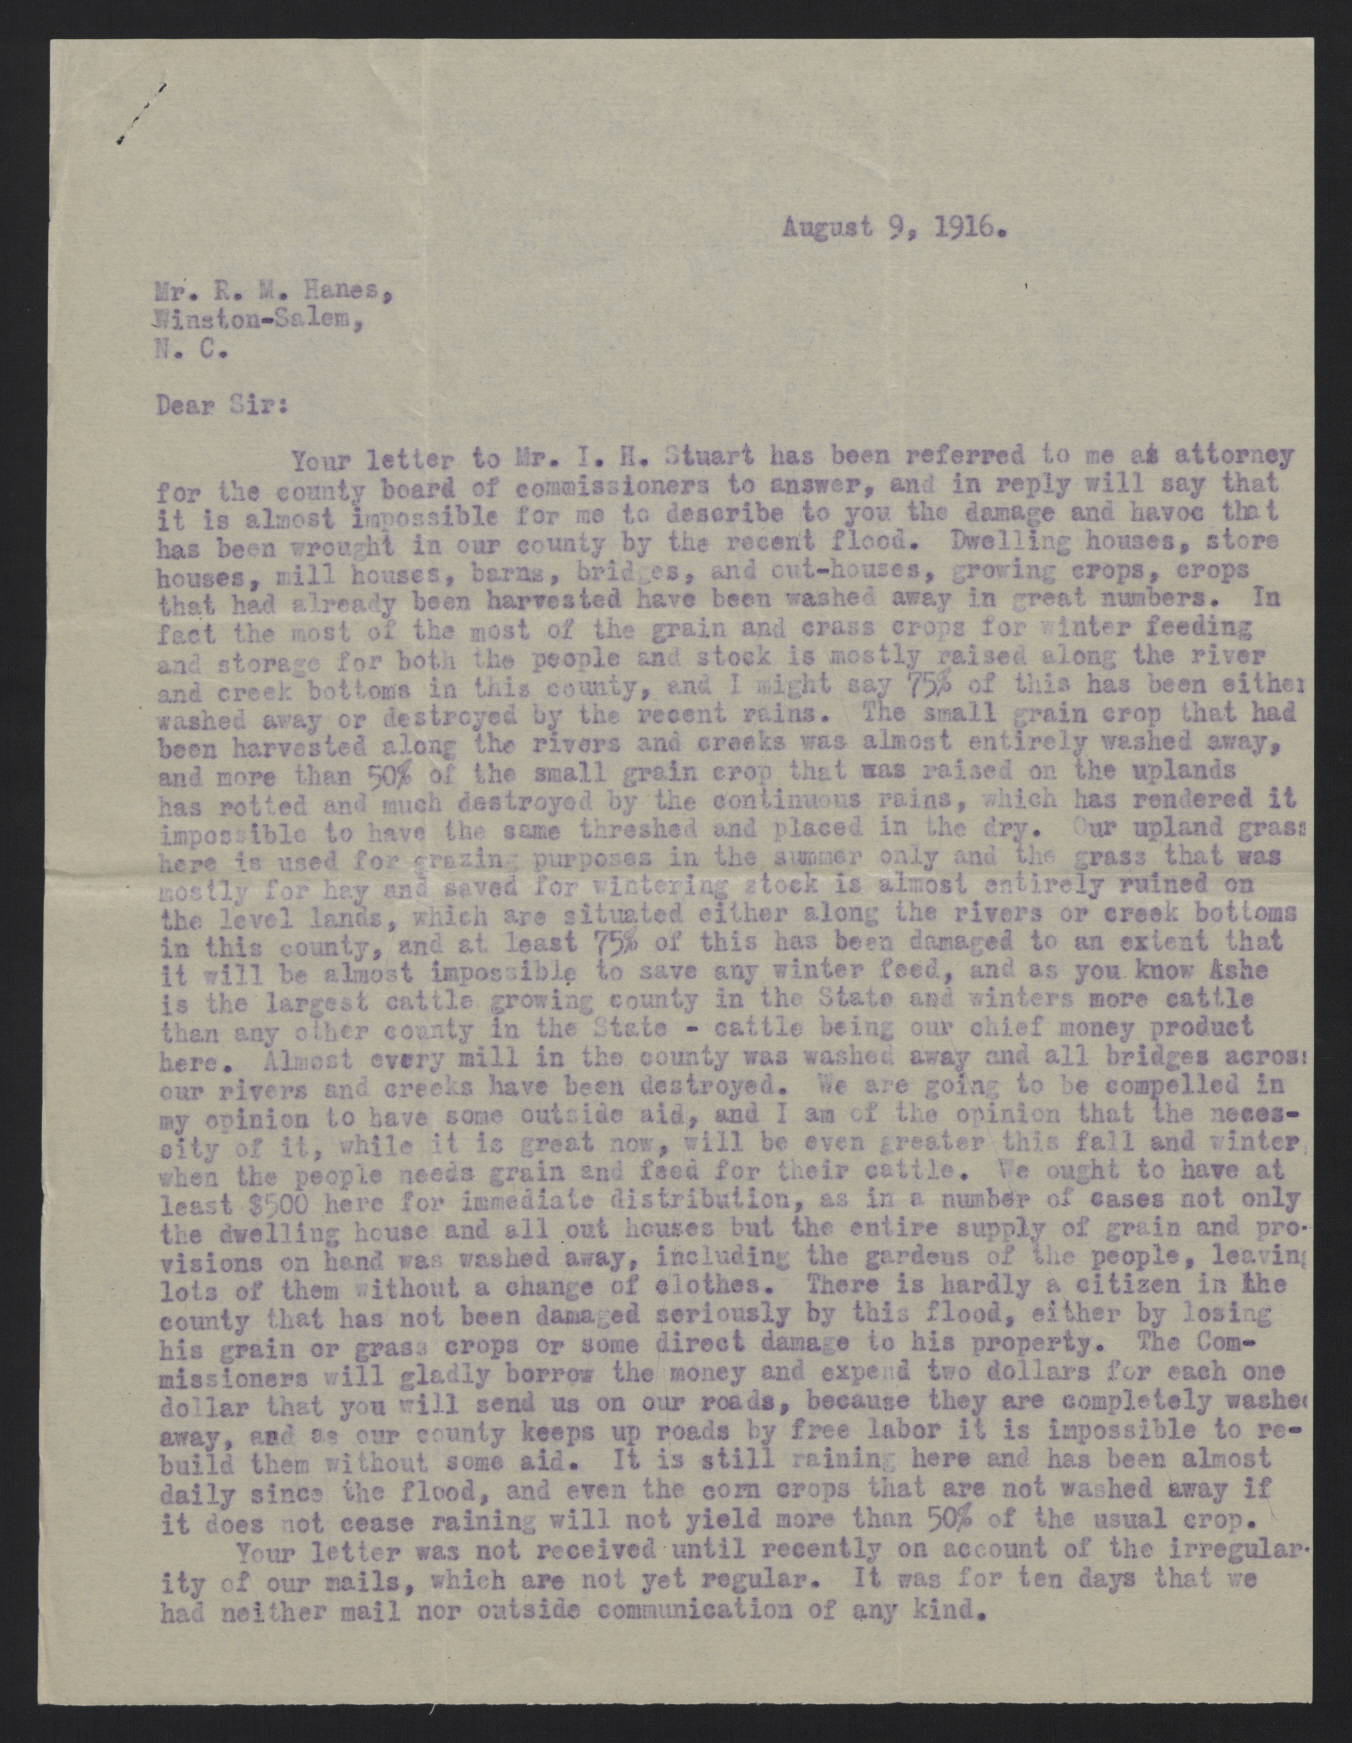 Letter from Bowie to Hanes, August 9, 1916, page 1